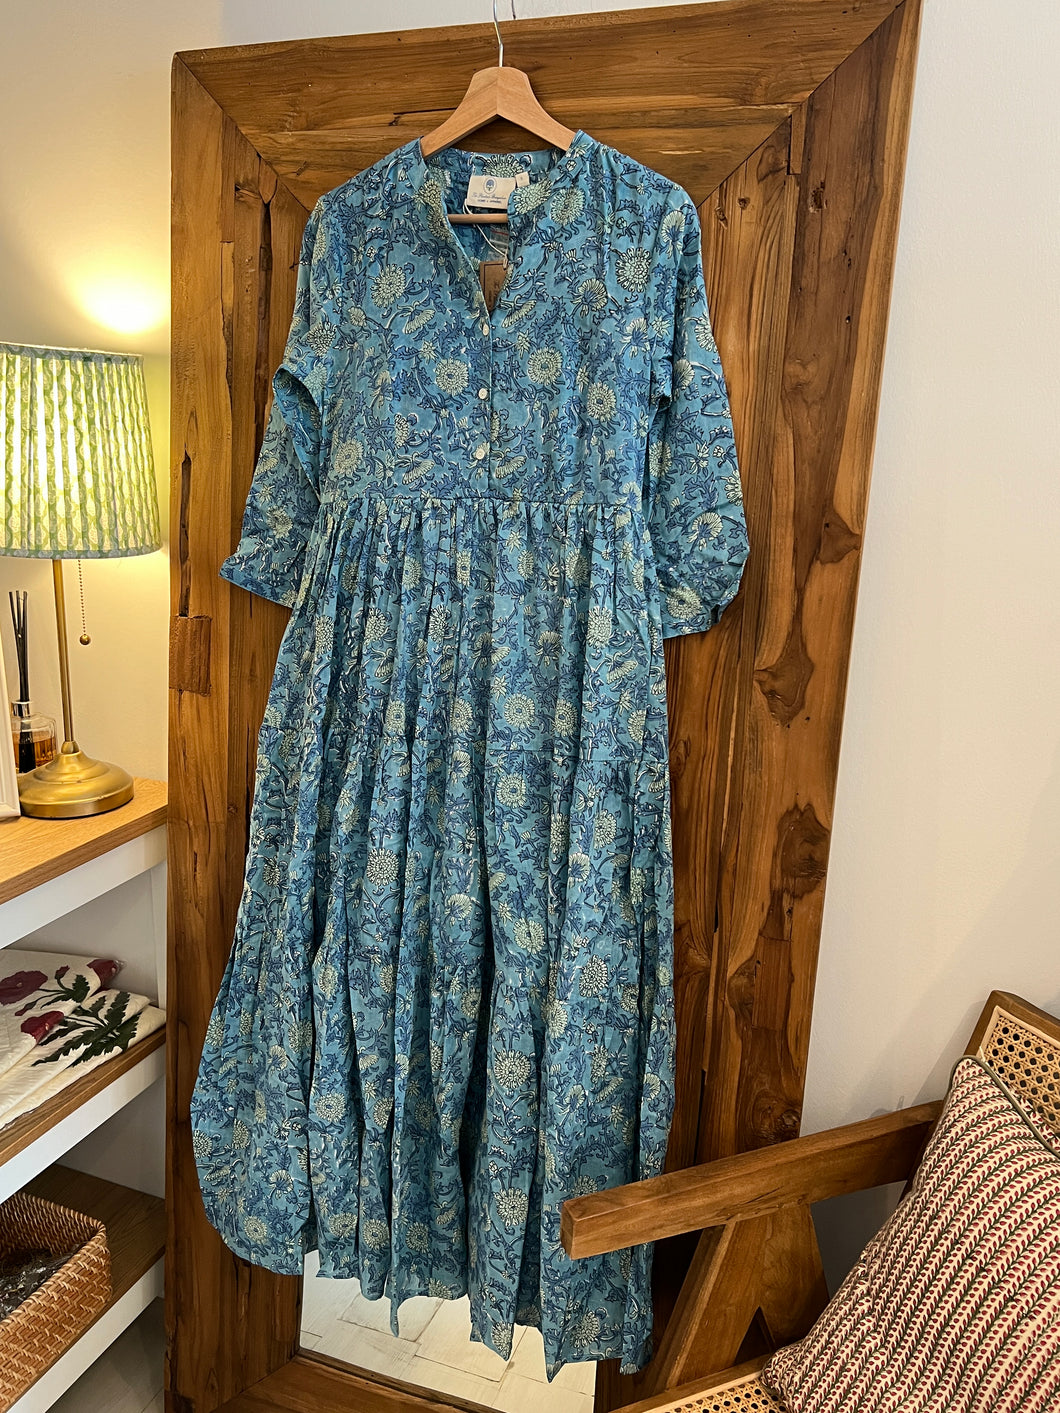 The Pepper dress -shades of blues